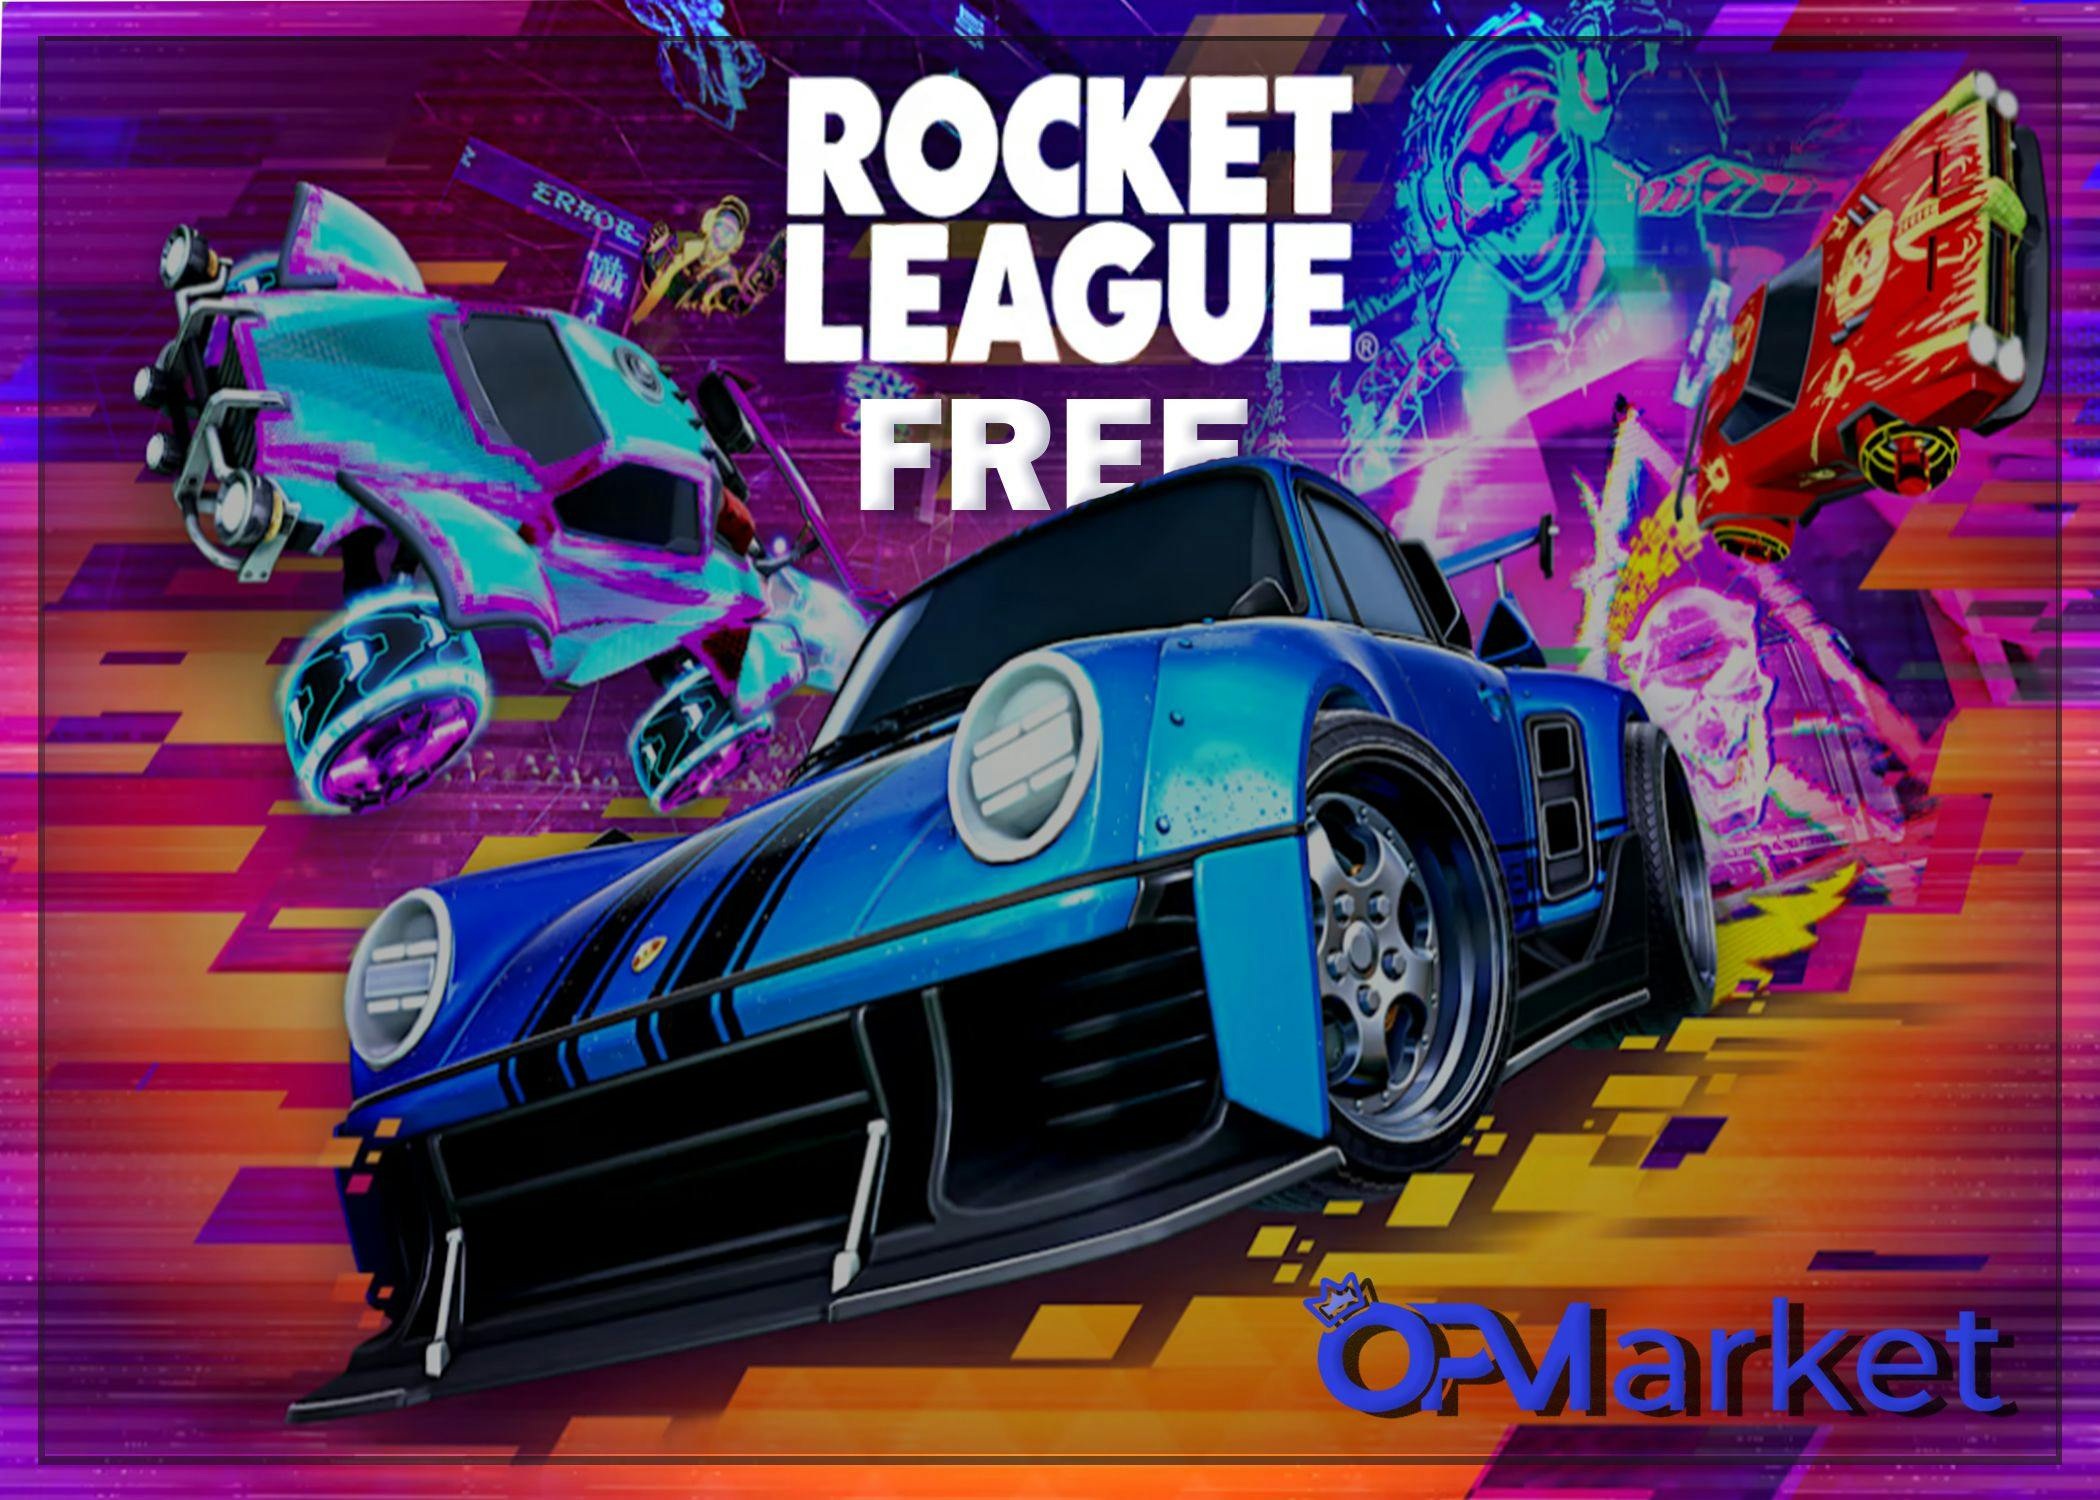 Rocket League Free to Play: From Paid Version to the Ultimate Gaming Experience